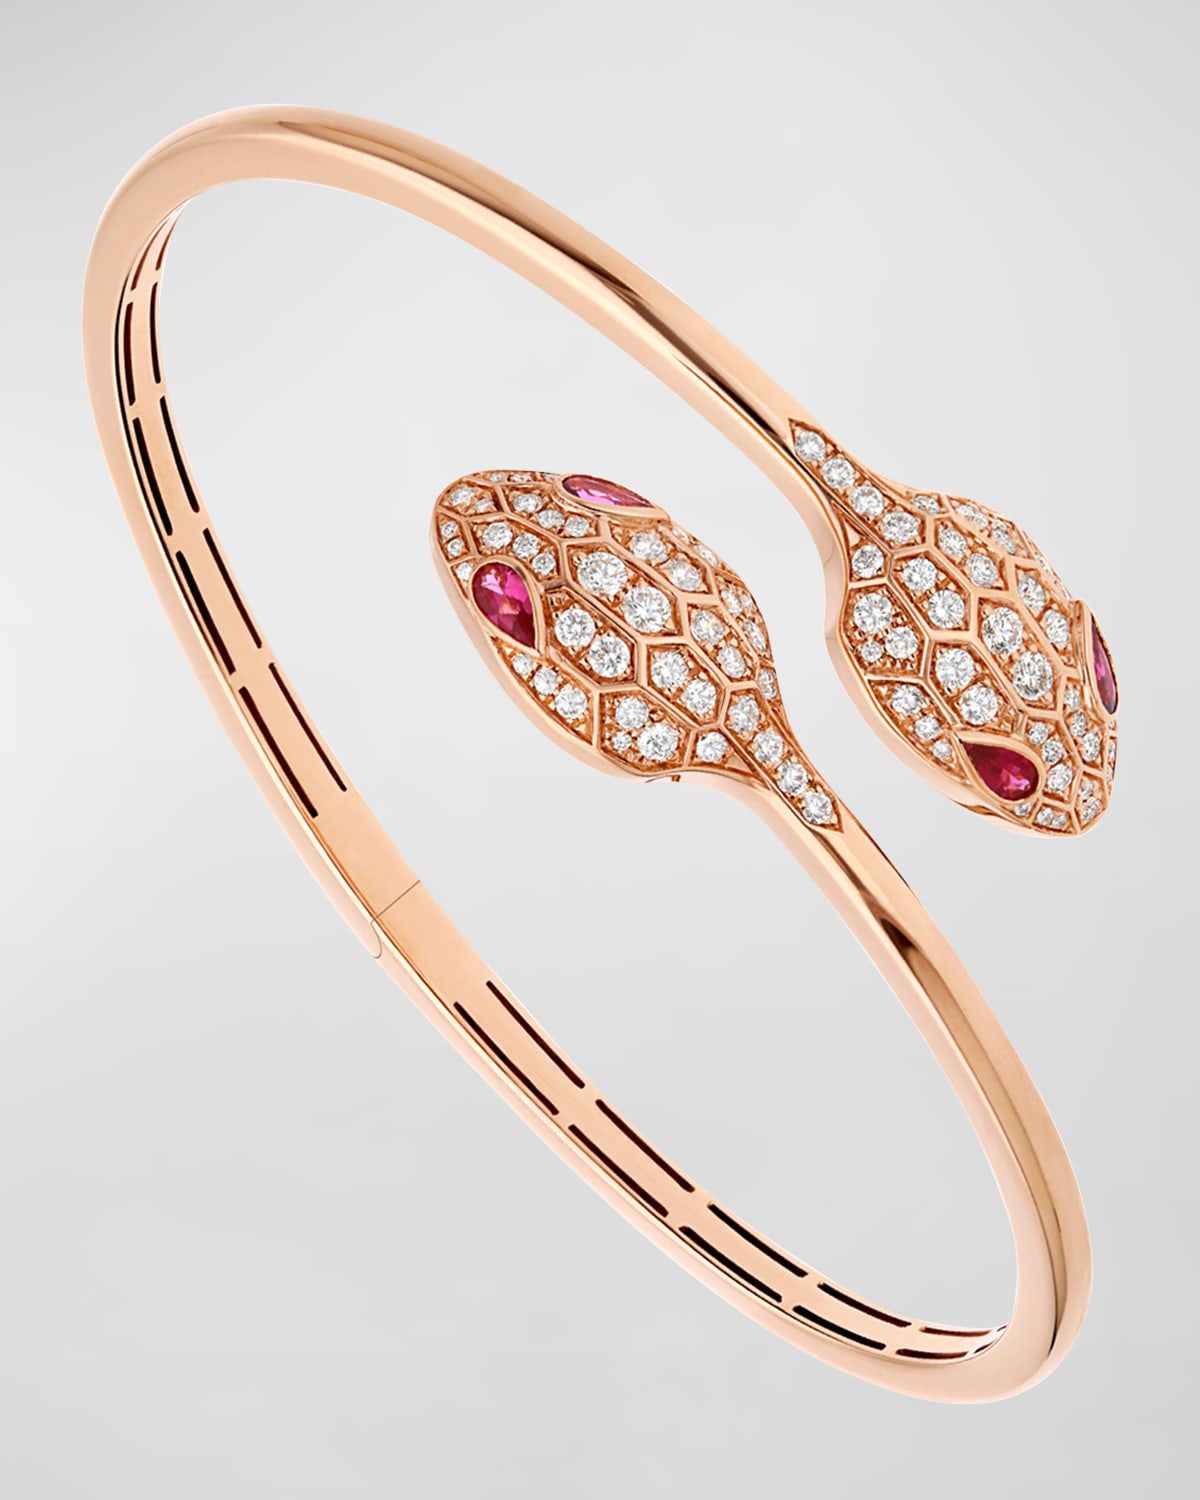 Serpenti Bypass Bracelet in 18k Rose Gold and Diamonds, Size S